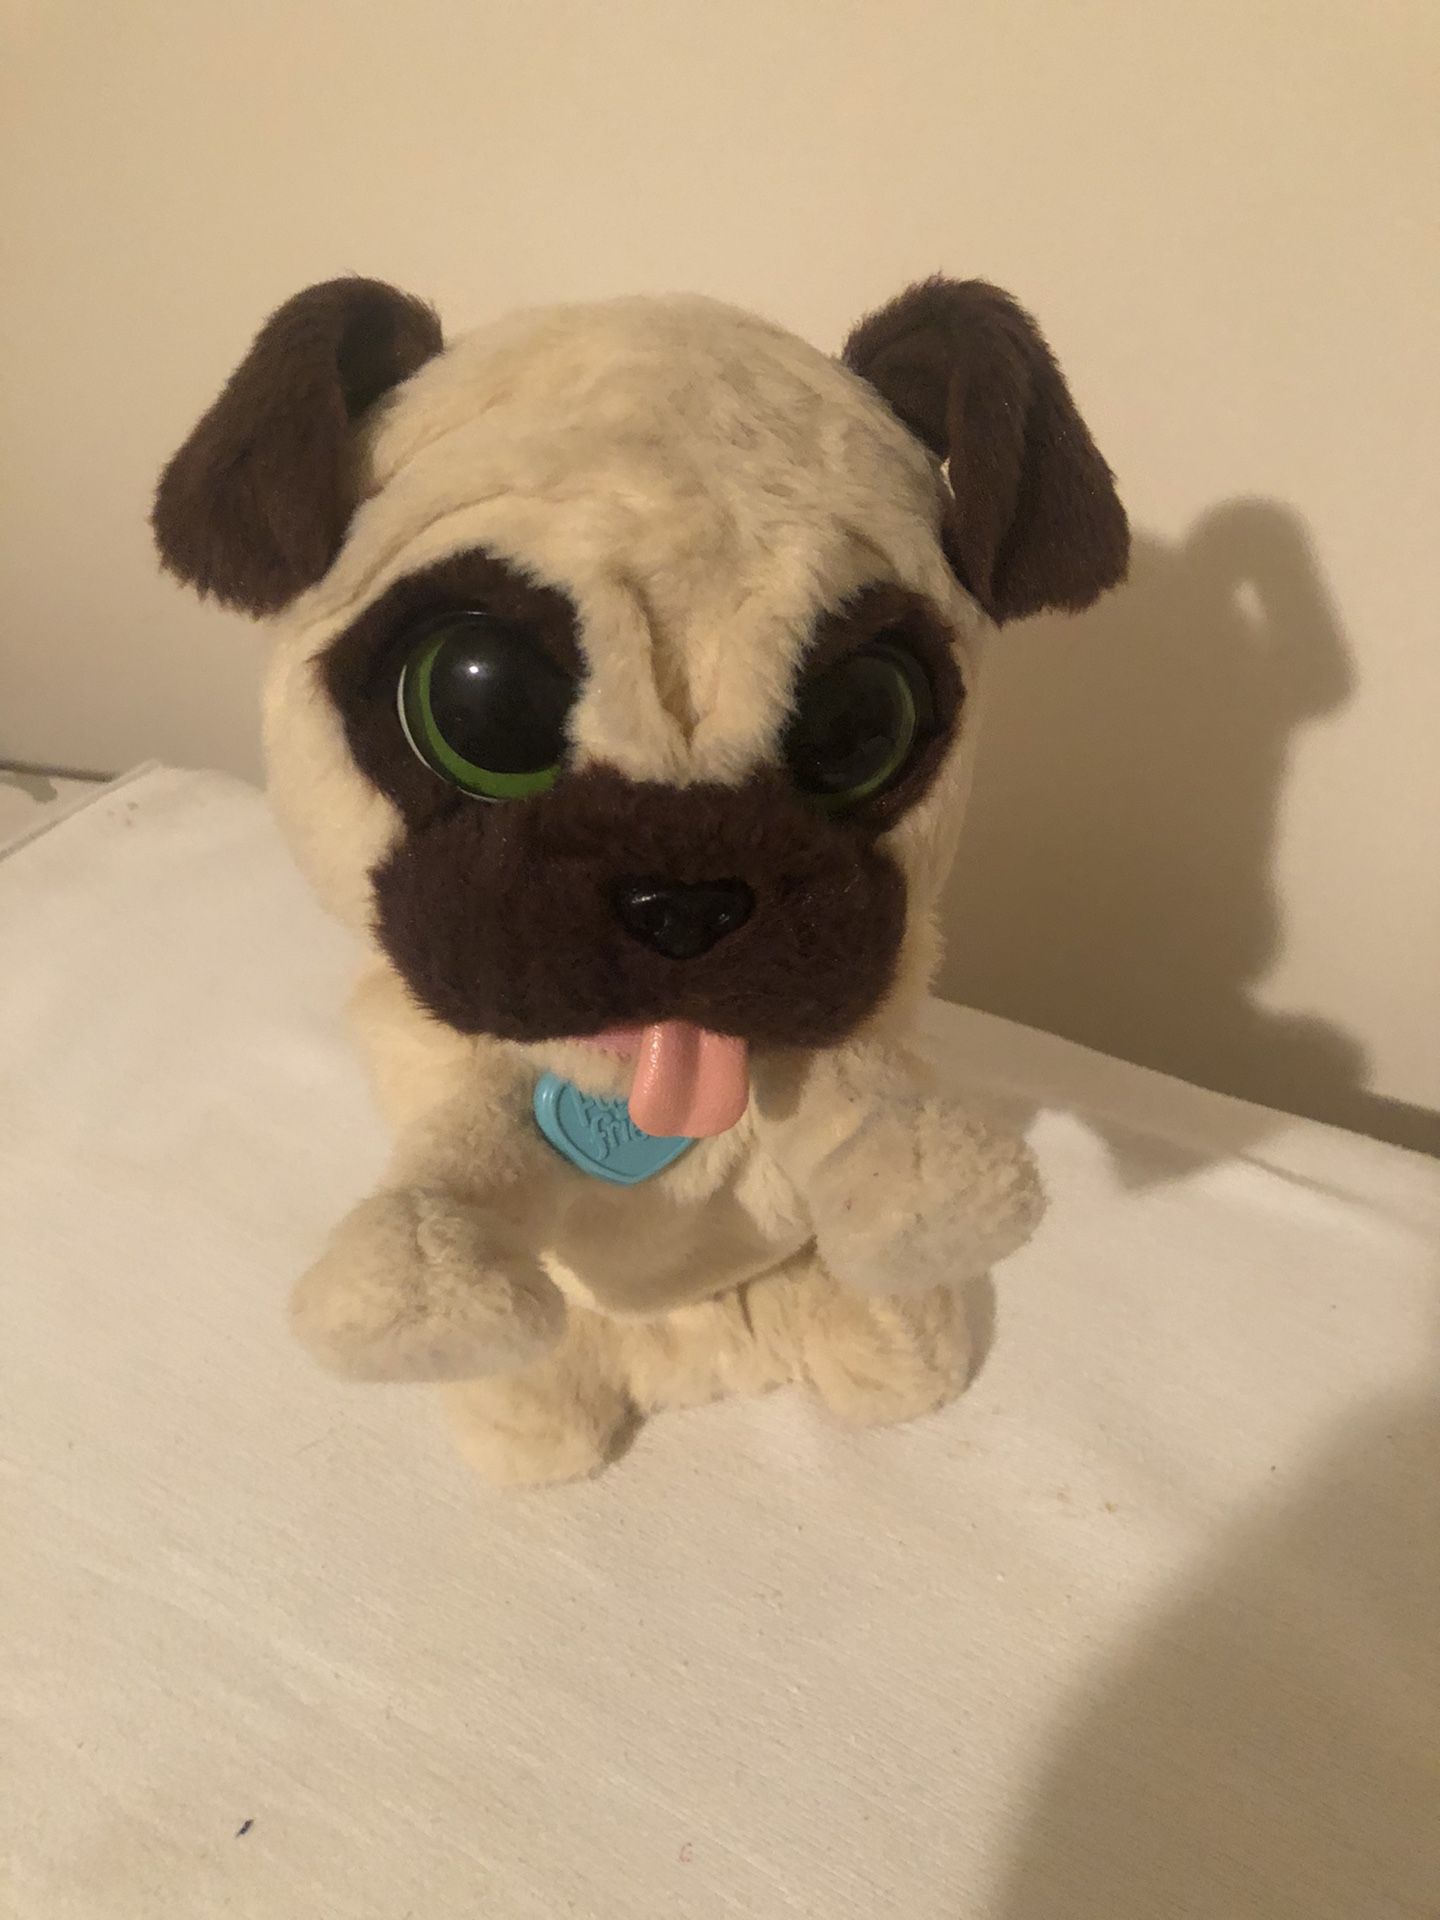 Fur Real Friends Pug - Works Great!